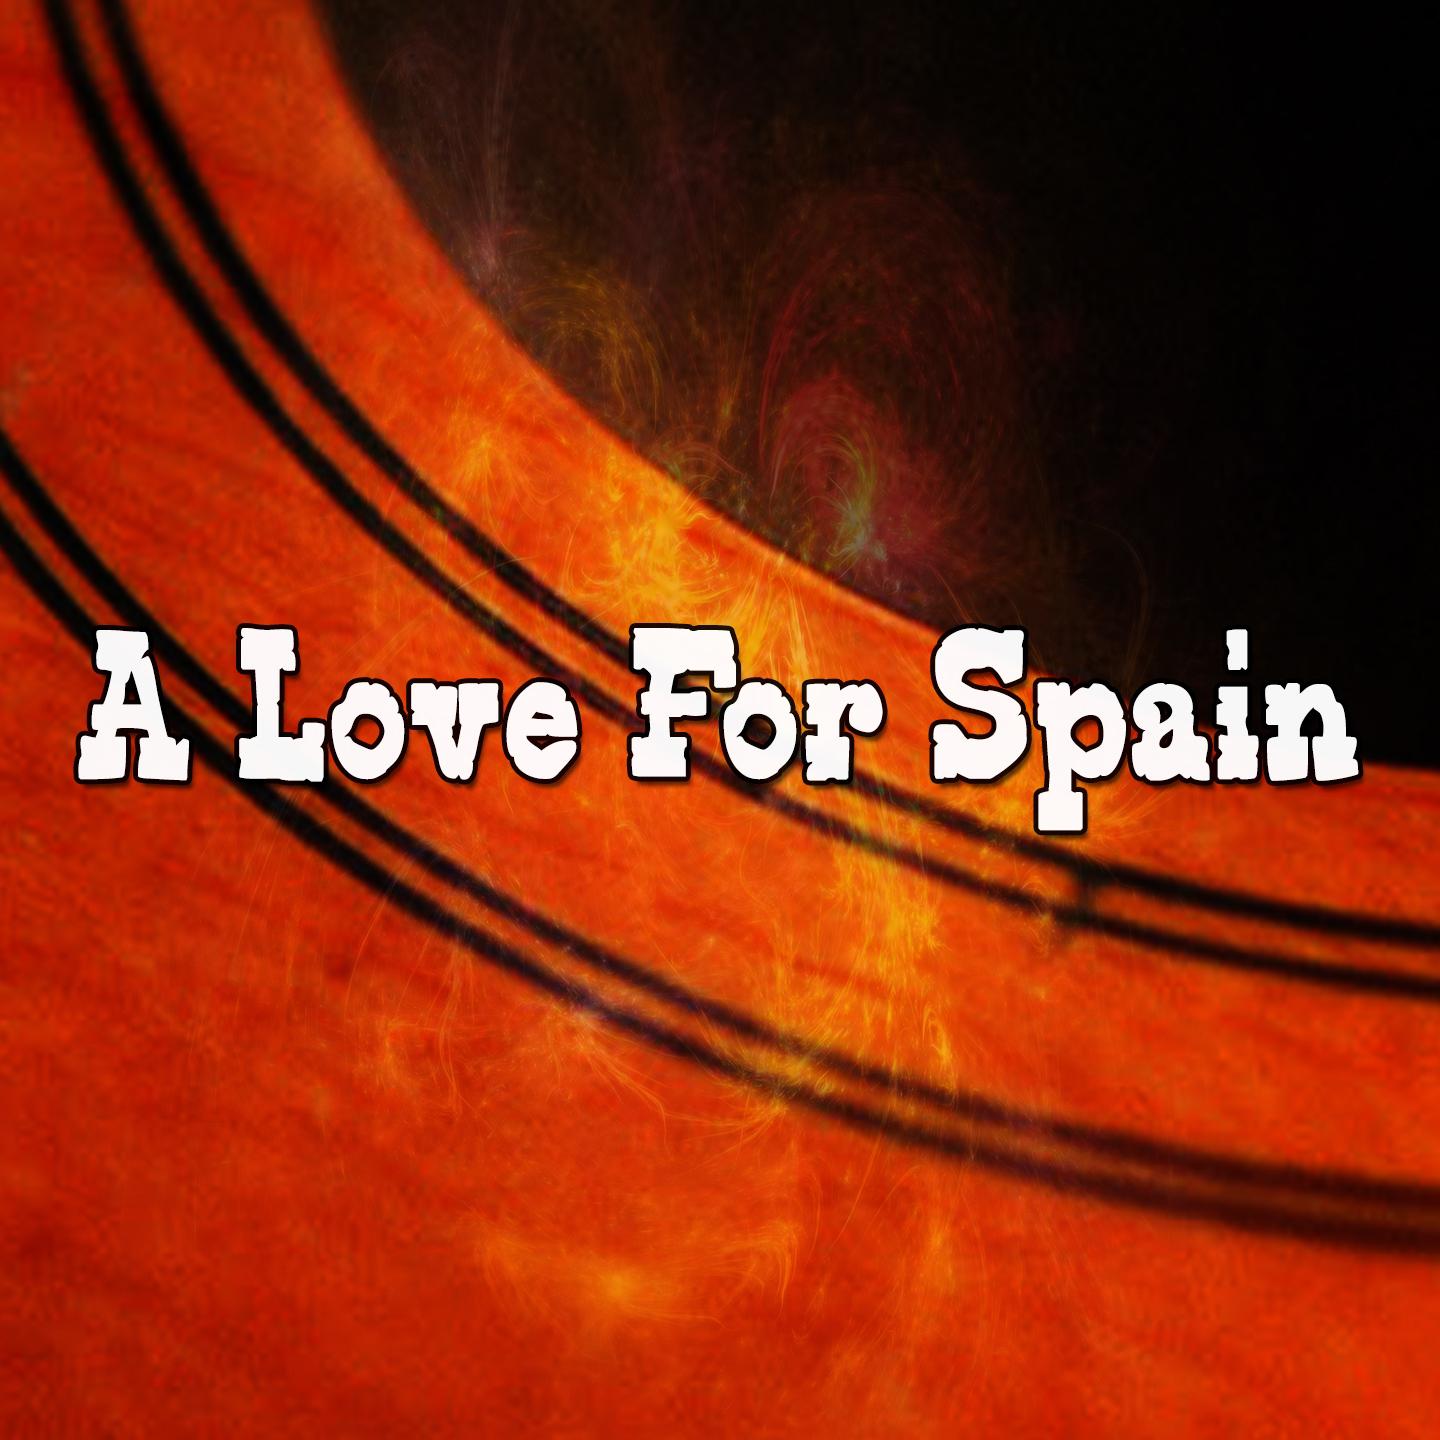 A Love for Spain